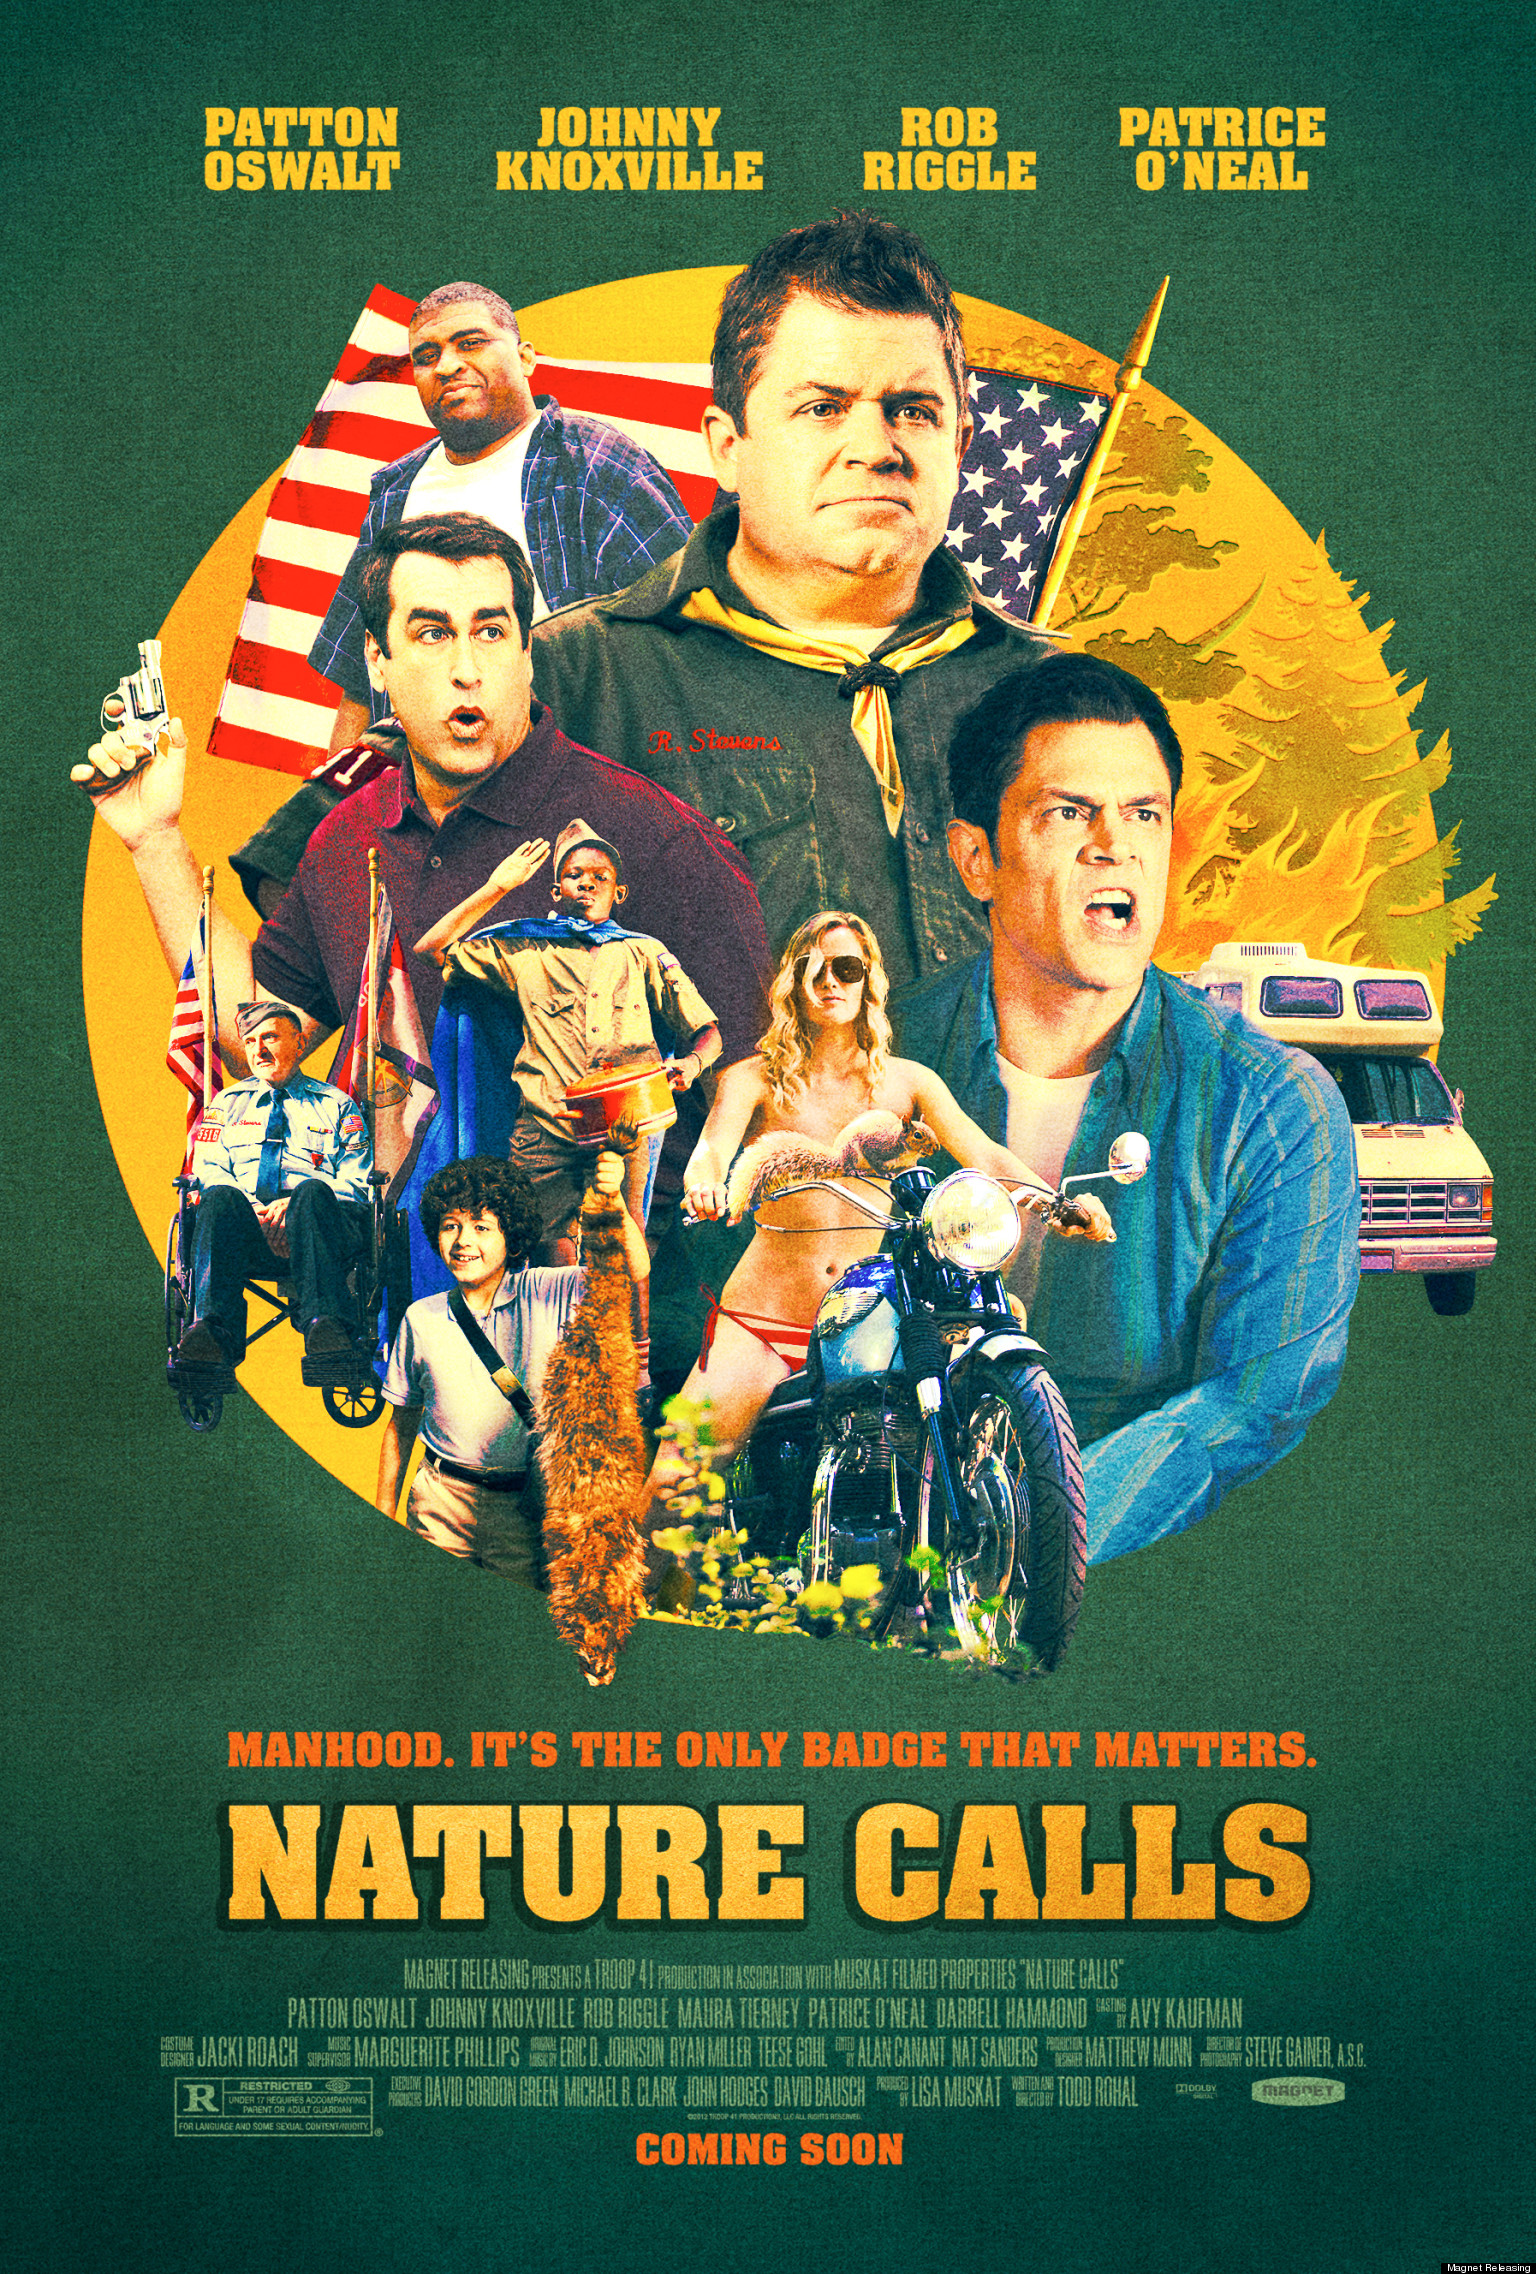 'Nature Calls' Poster: First Look At Patrice O'Neal's Final Film With Patton Oswalt ...